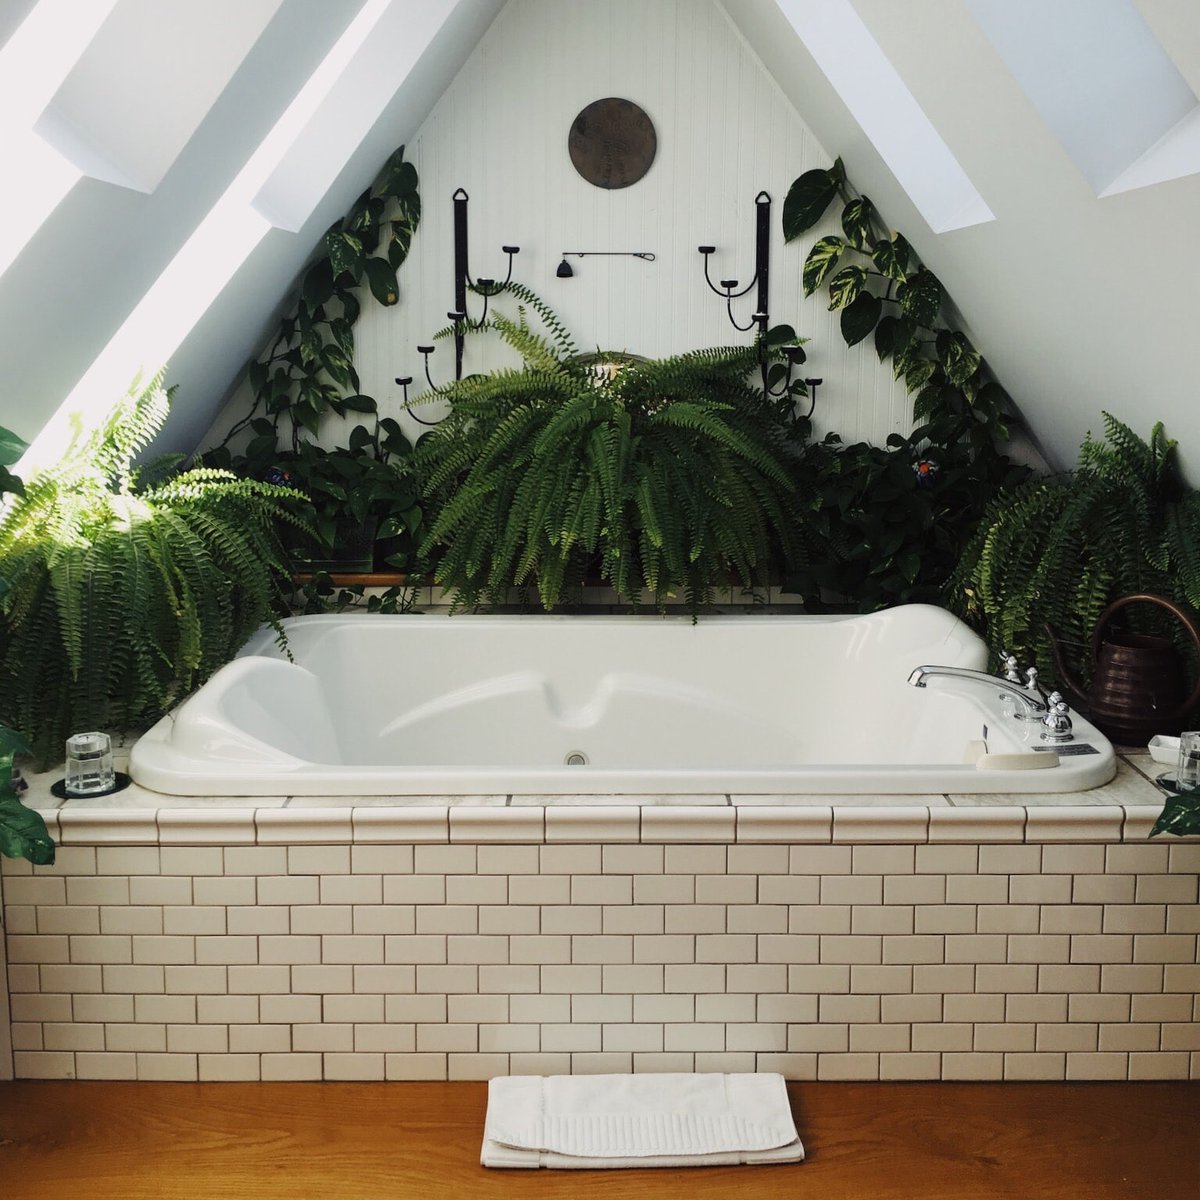 Is the greenery in this bathroom relaxing or overwhelming?

See my new info! facebook.com/49322682420973…